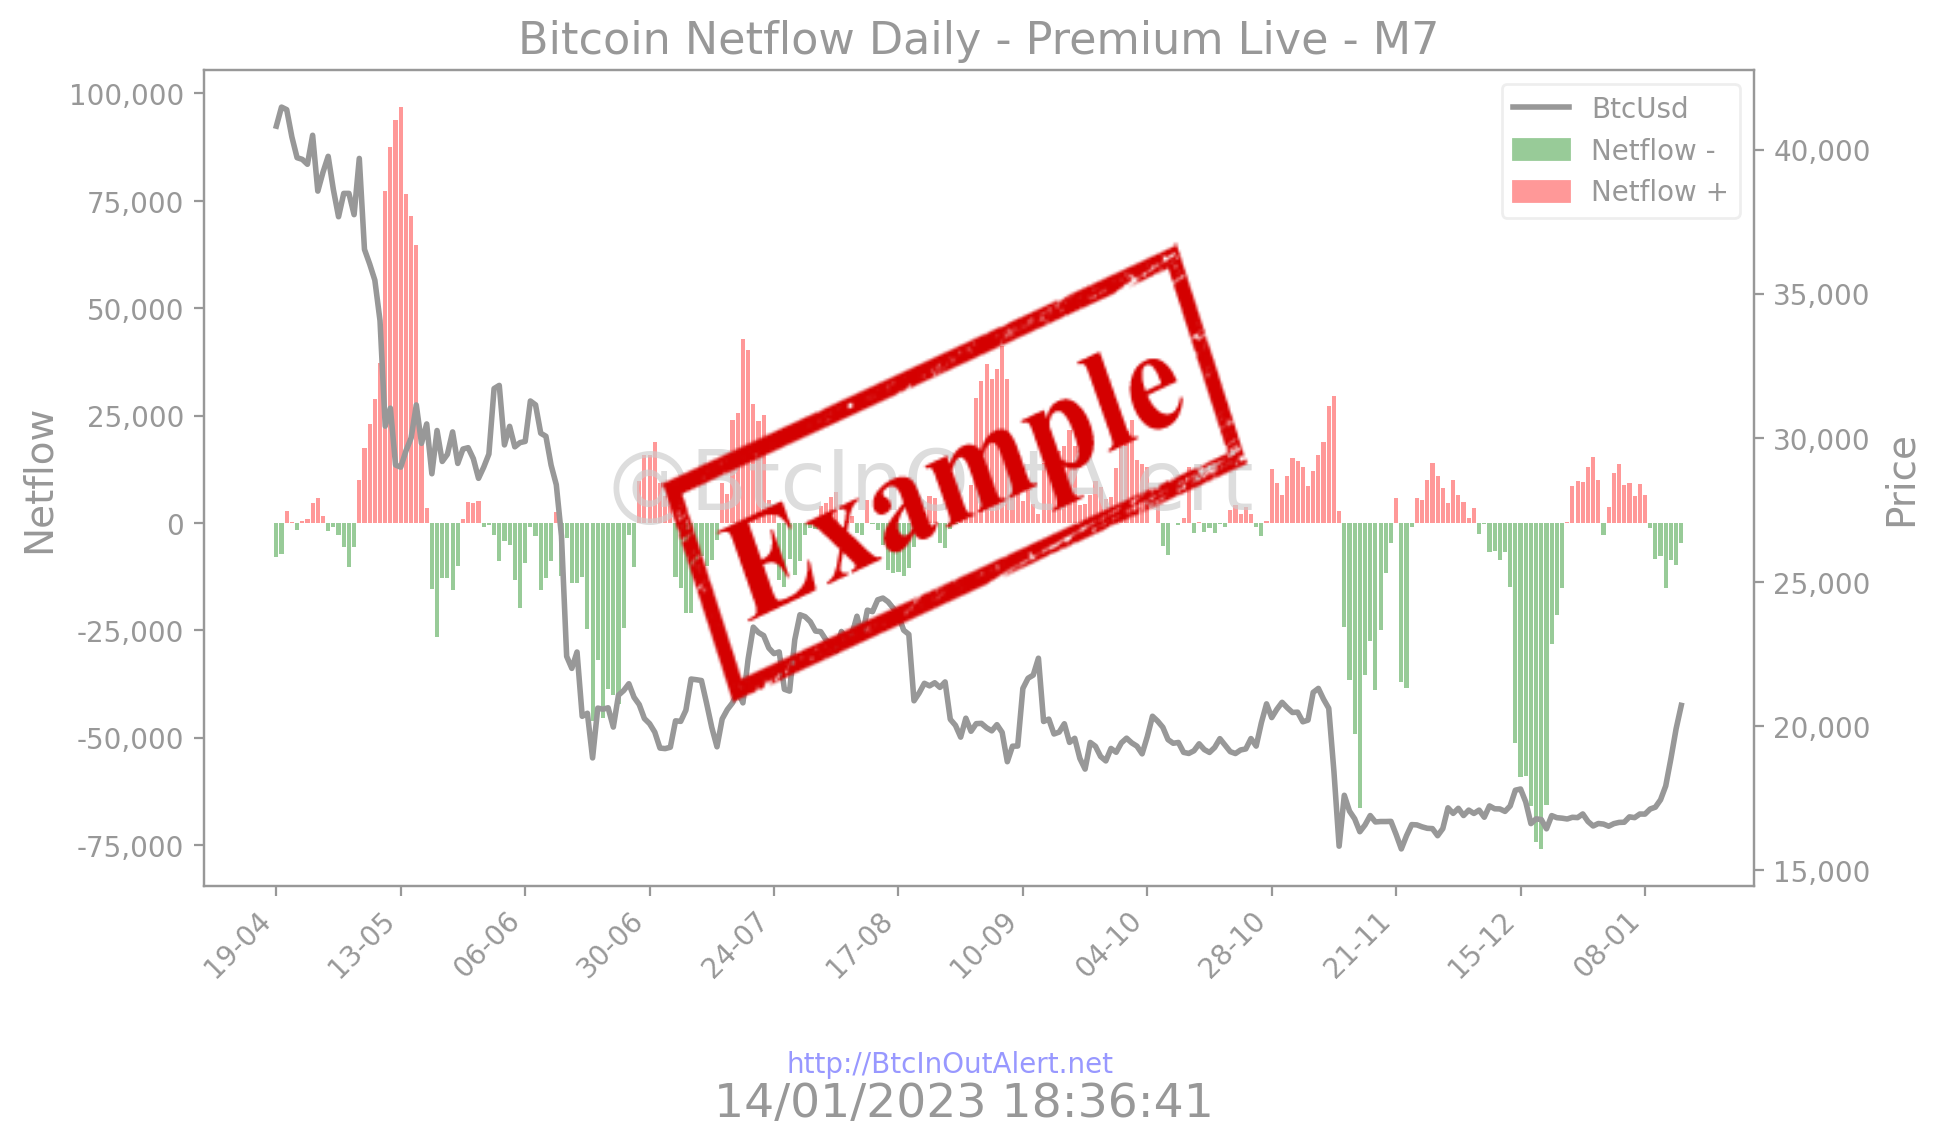 Bitcoin Netflow Daily Live M7